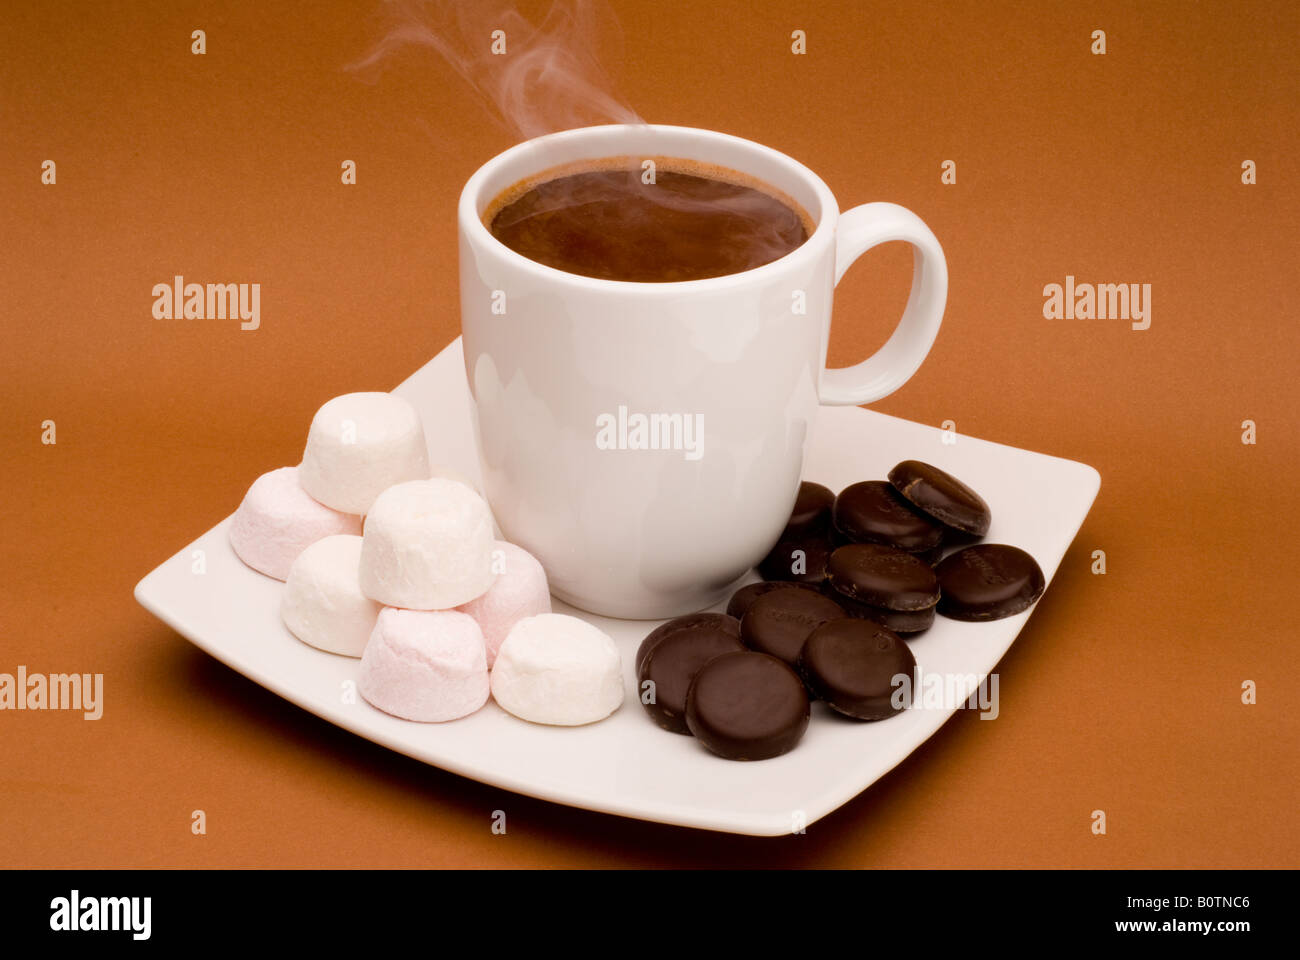 Cup of steaming hot chocolate with marshmallows and chocolate sweets. Stock Photo